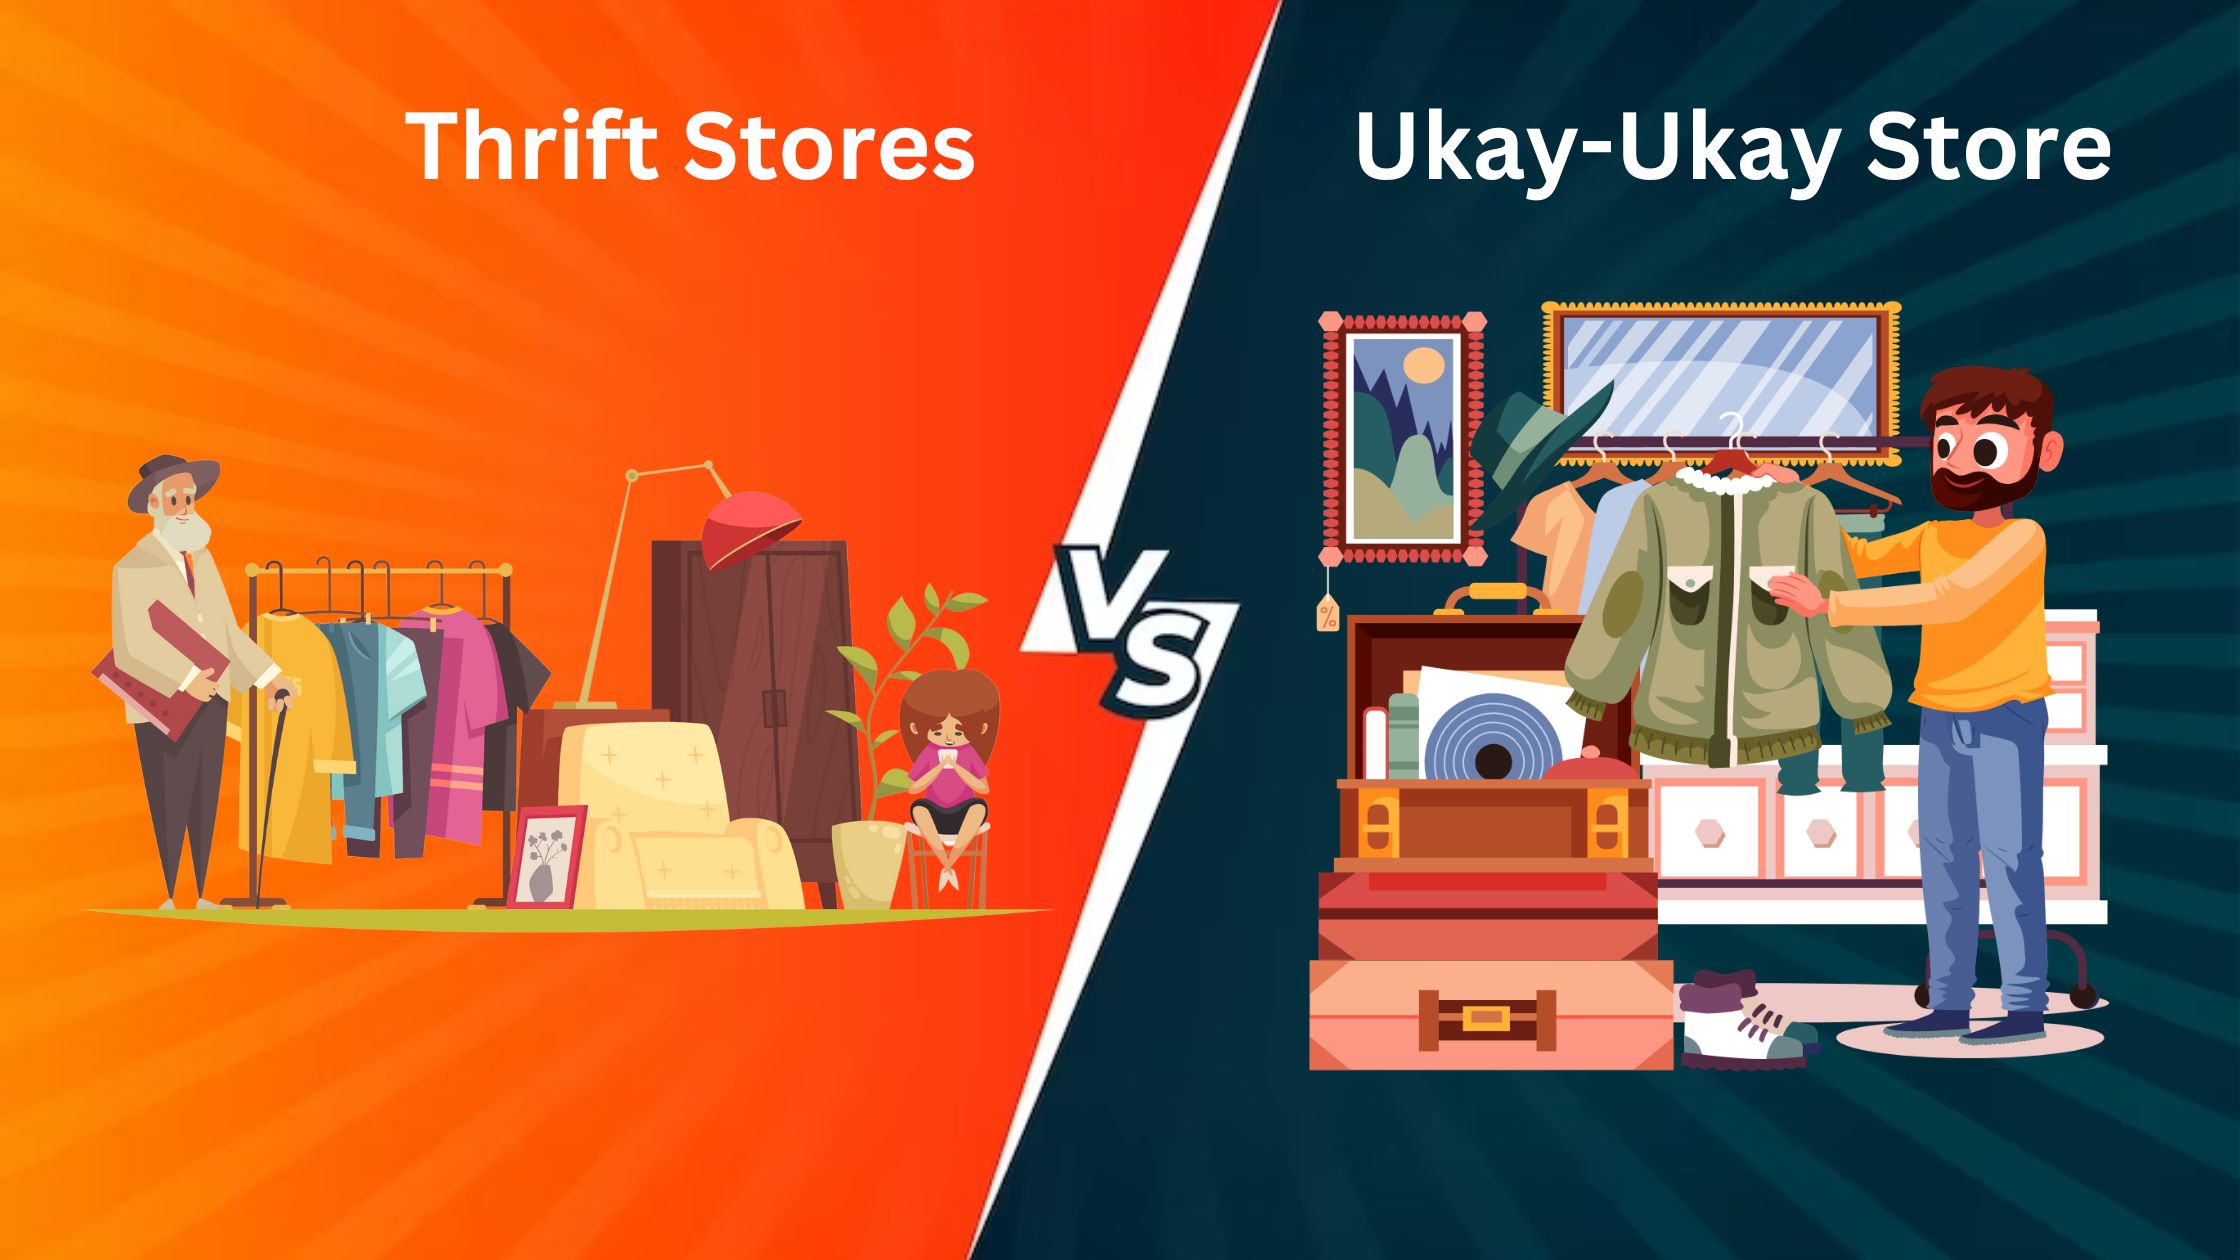 Difference Between Thrift Stores and Ukay-Ukay